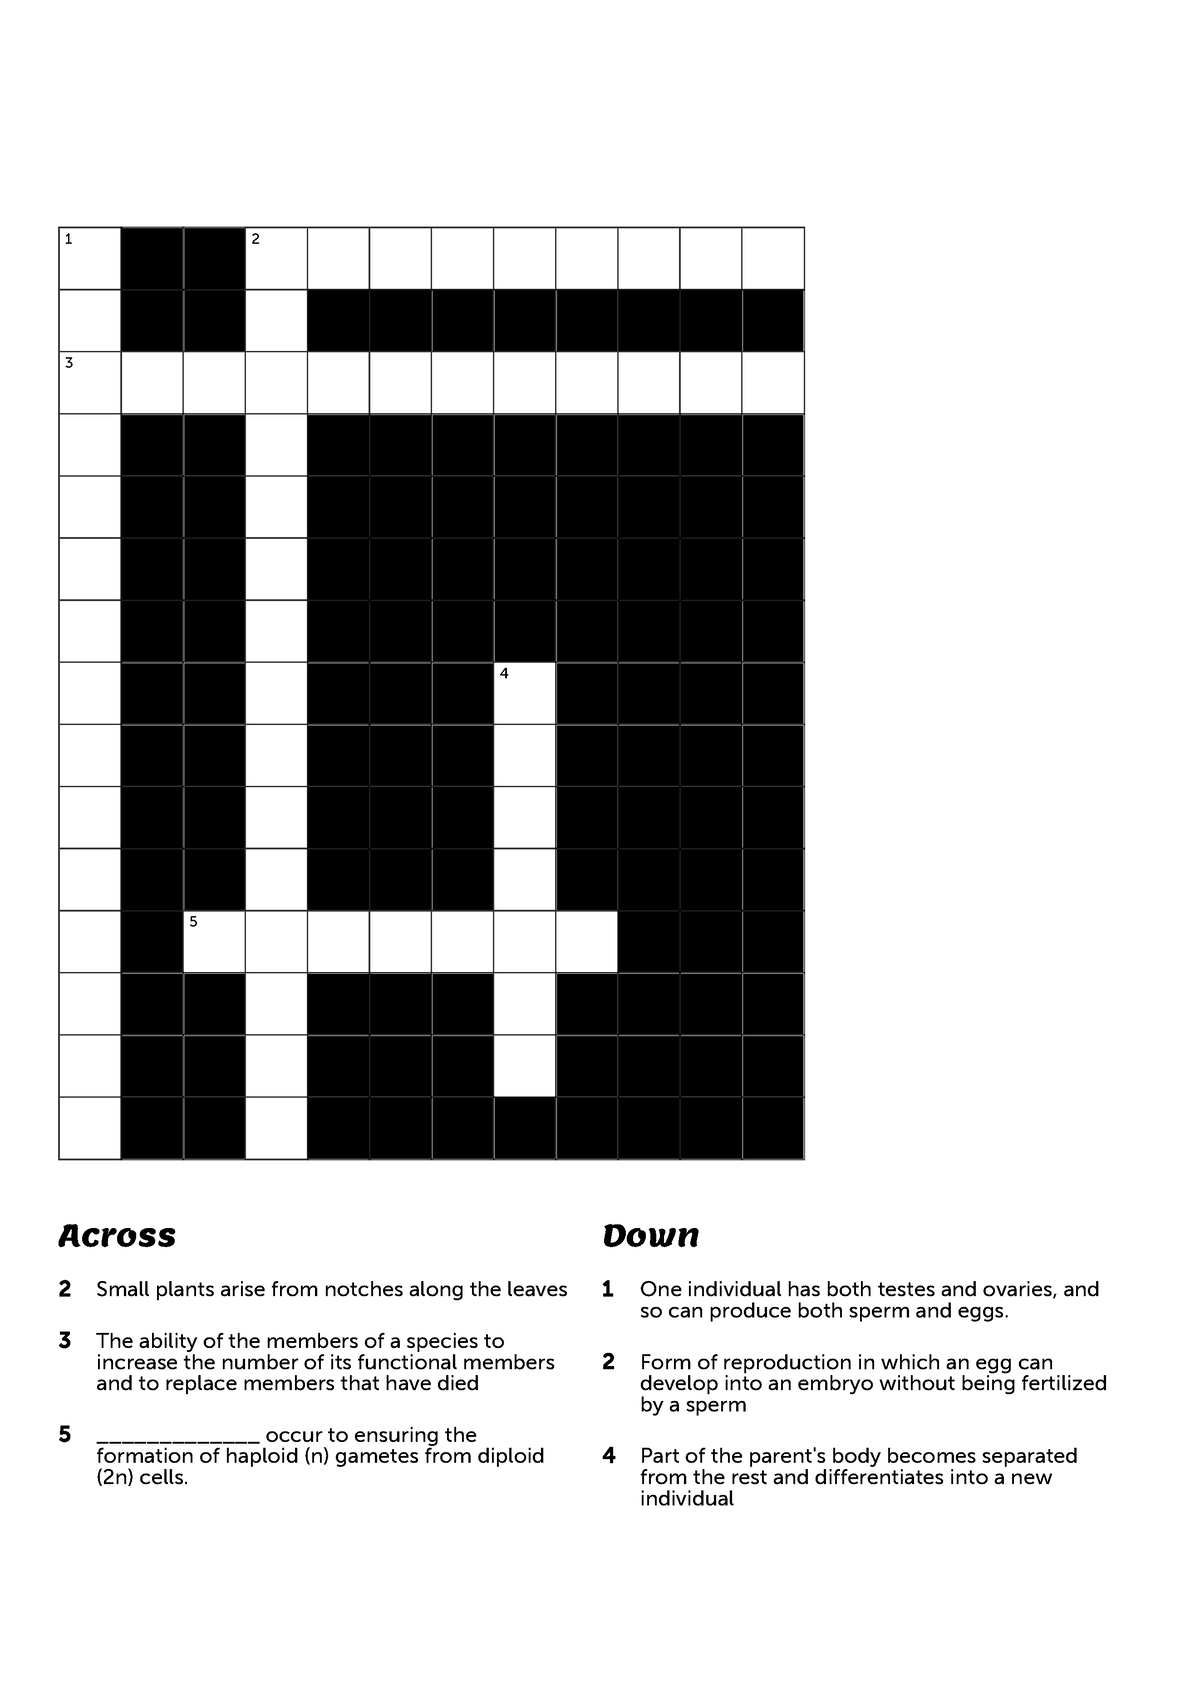 Play Crossword chap 8 Puzzel Across 2 Small plants arise from